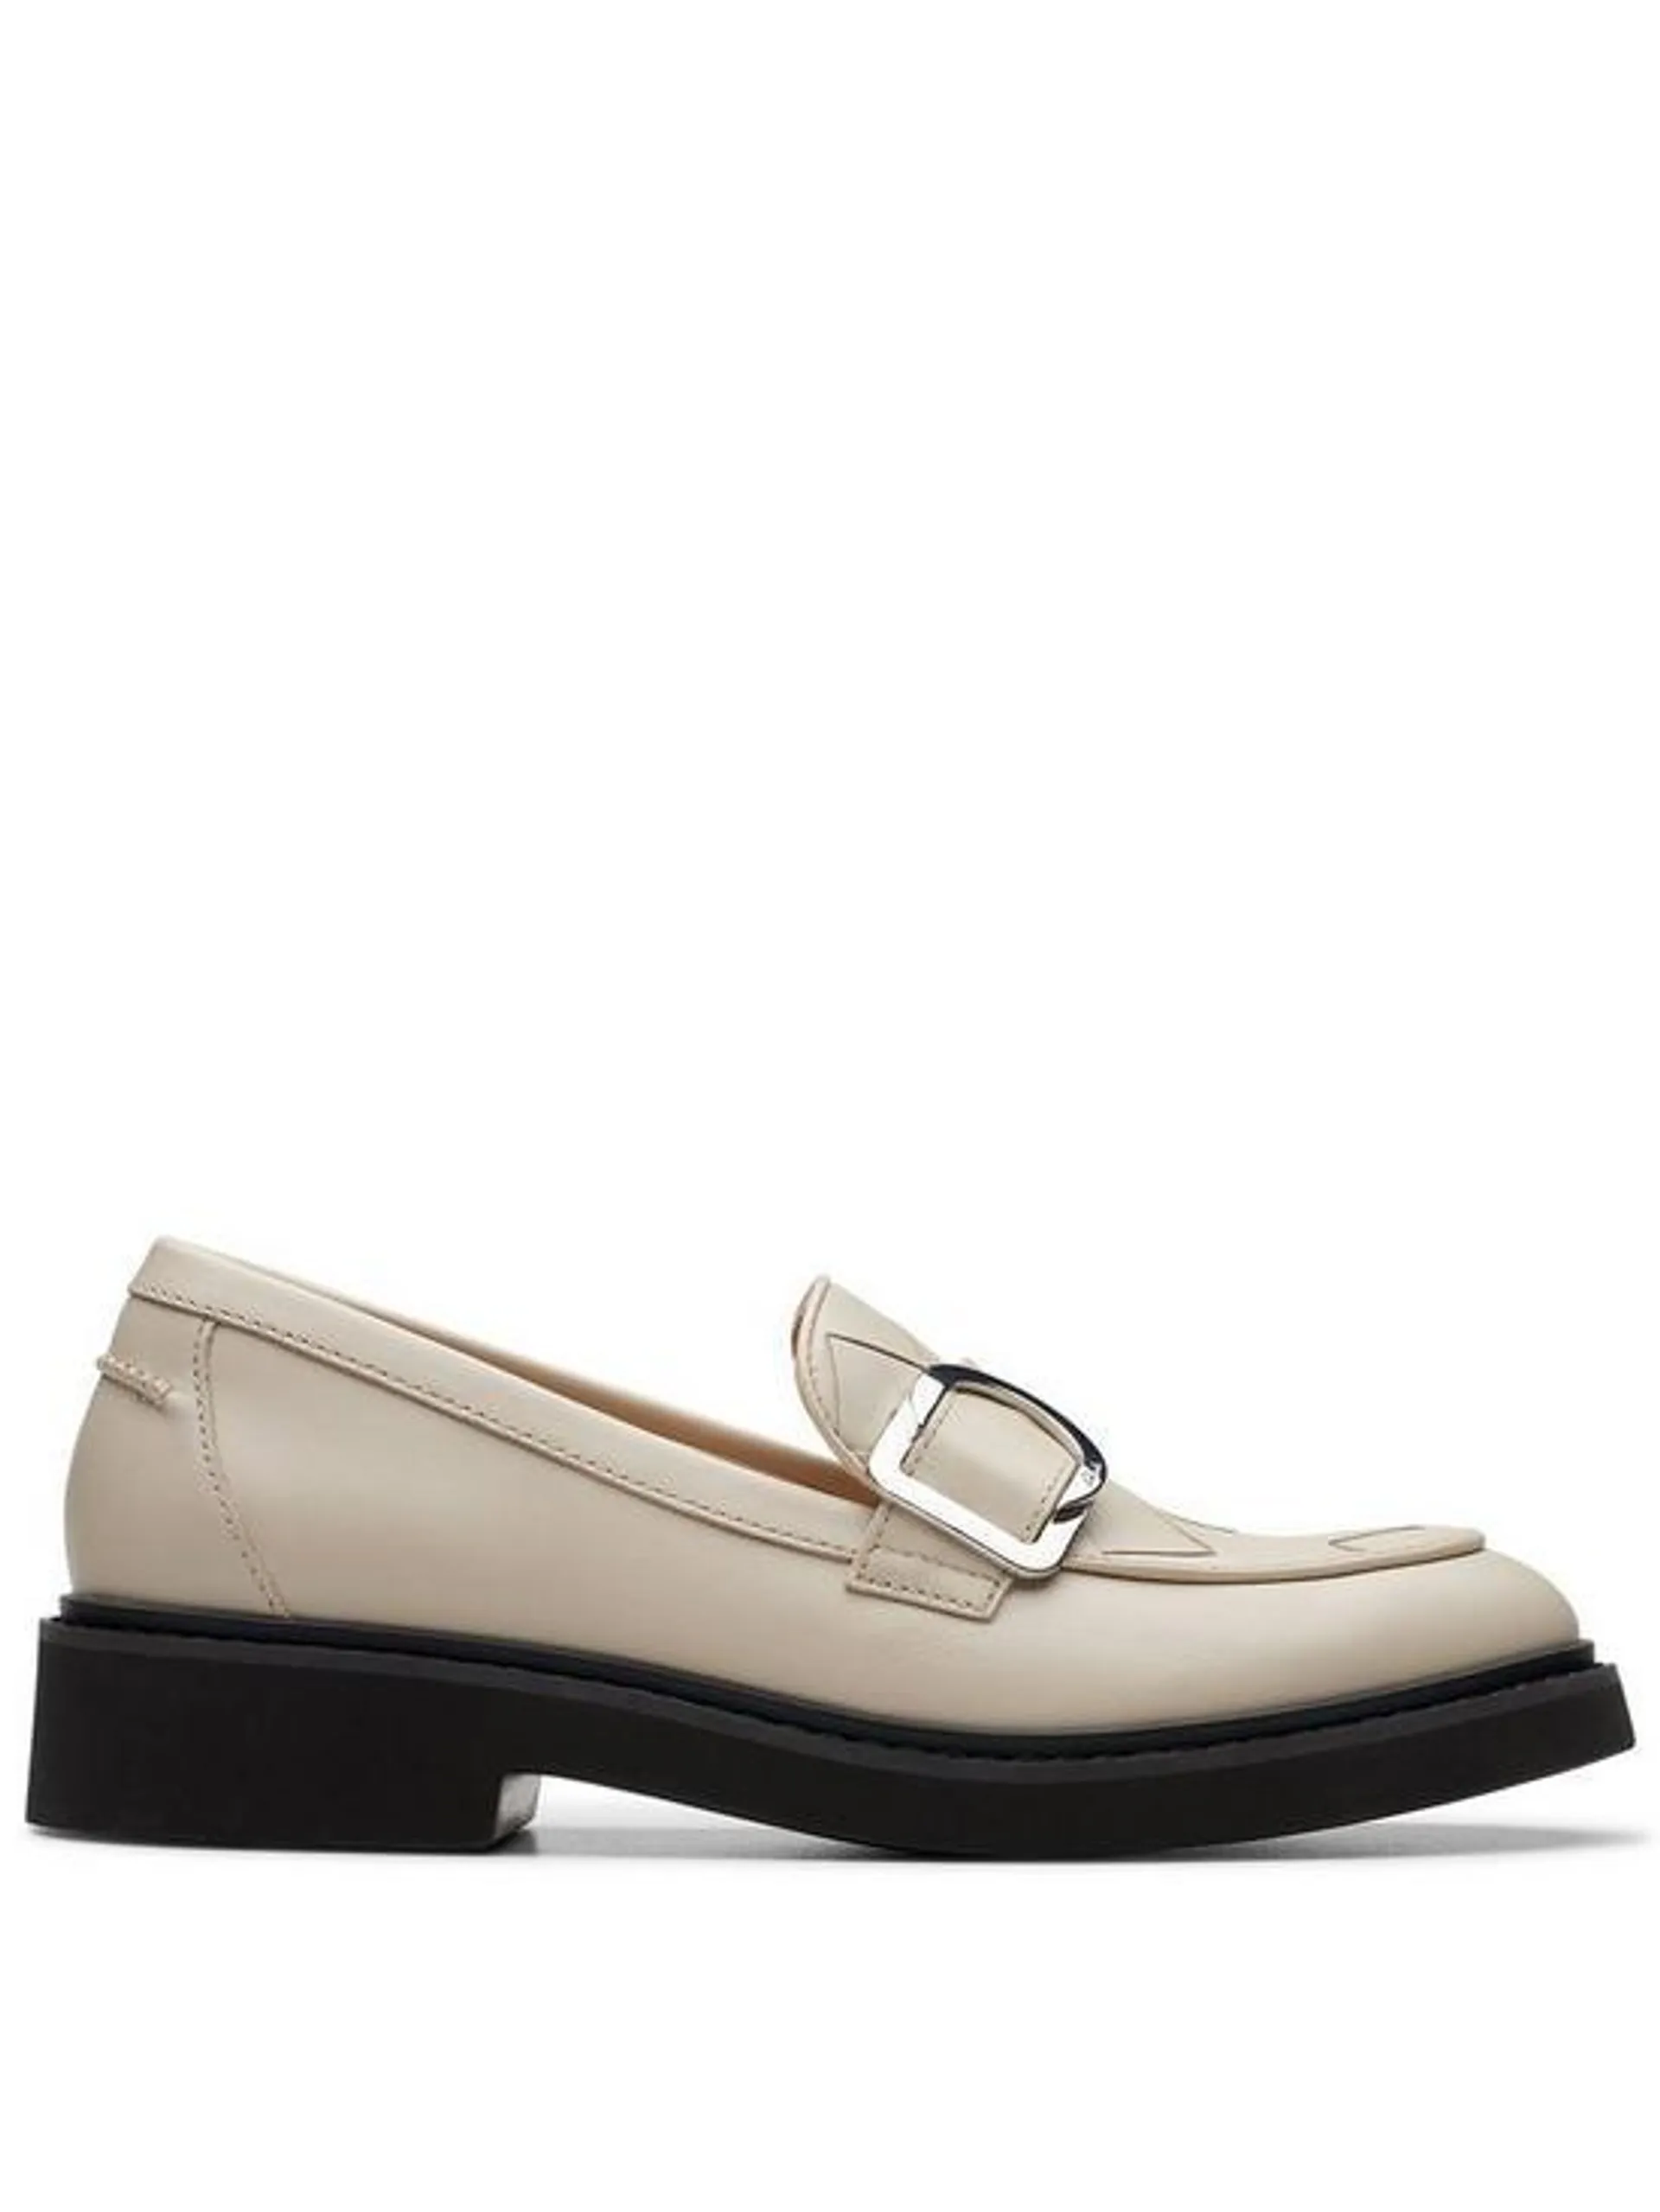 Splend Penny Buckle Front Leather Loafers - Ivory